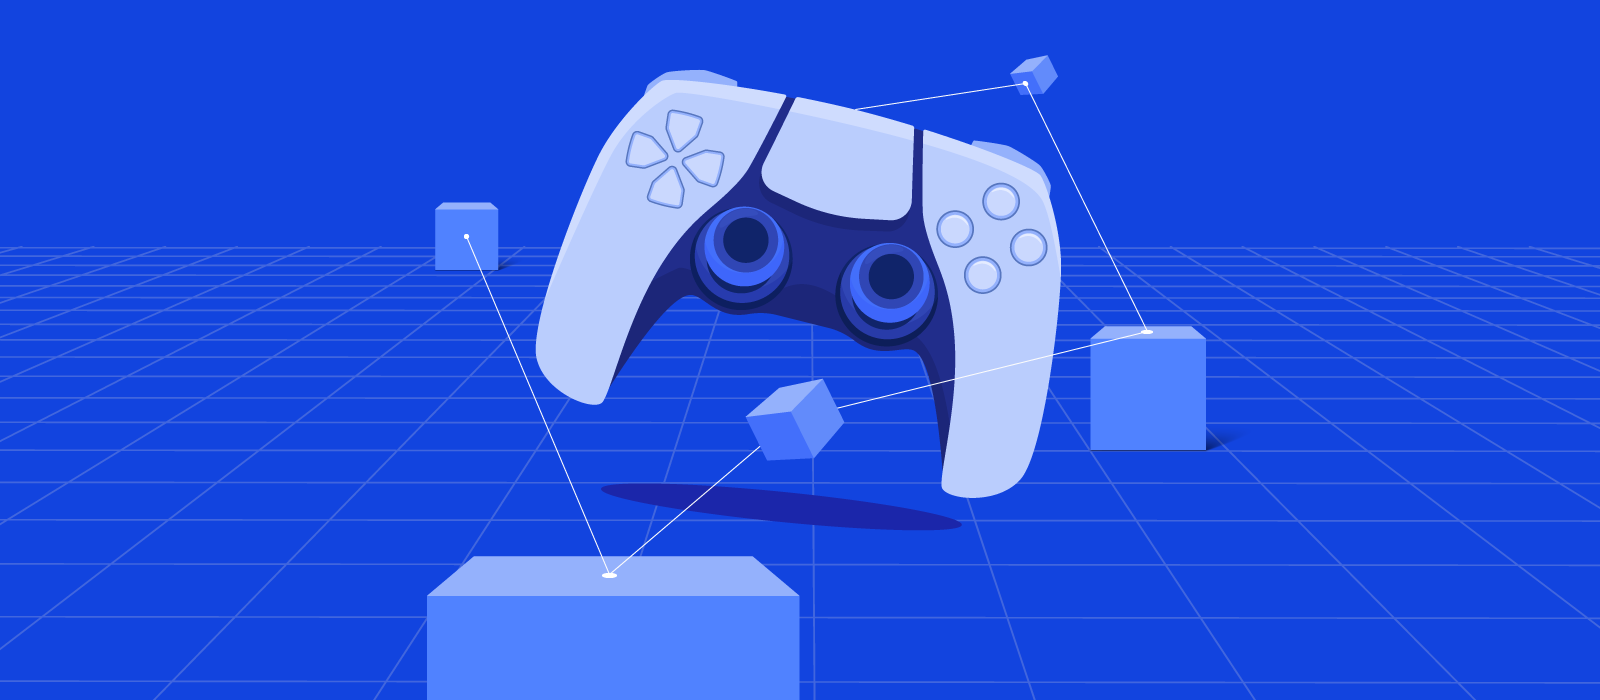 A gamepad surrounded by blue cubes symbolizing blockchain